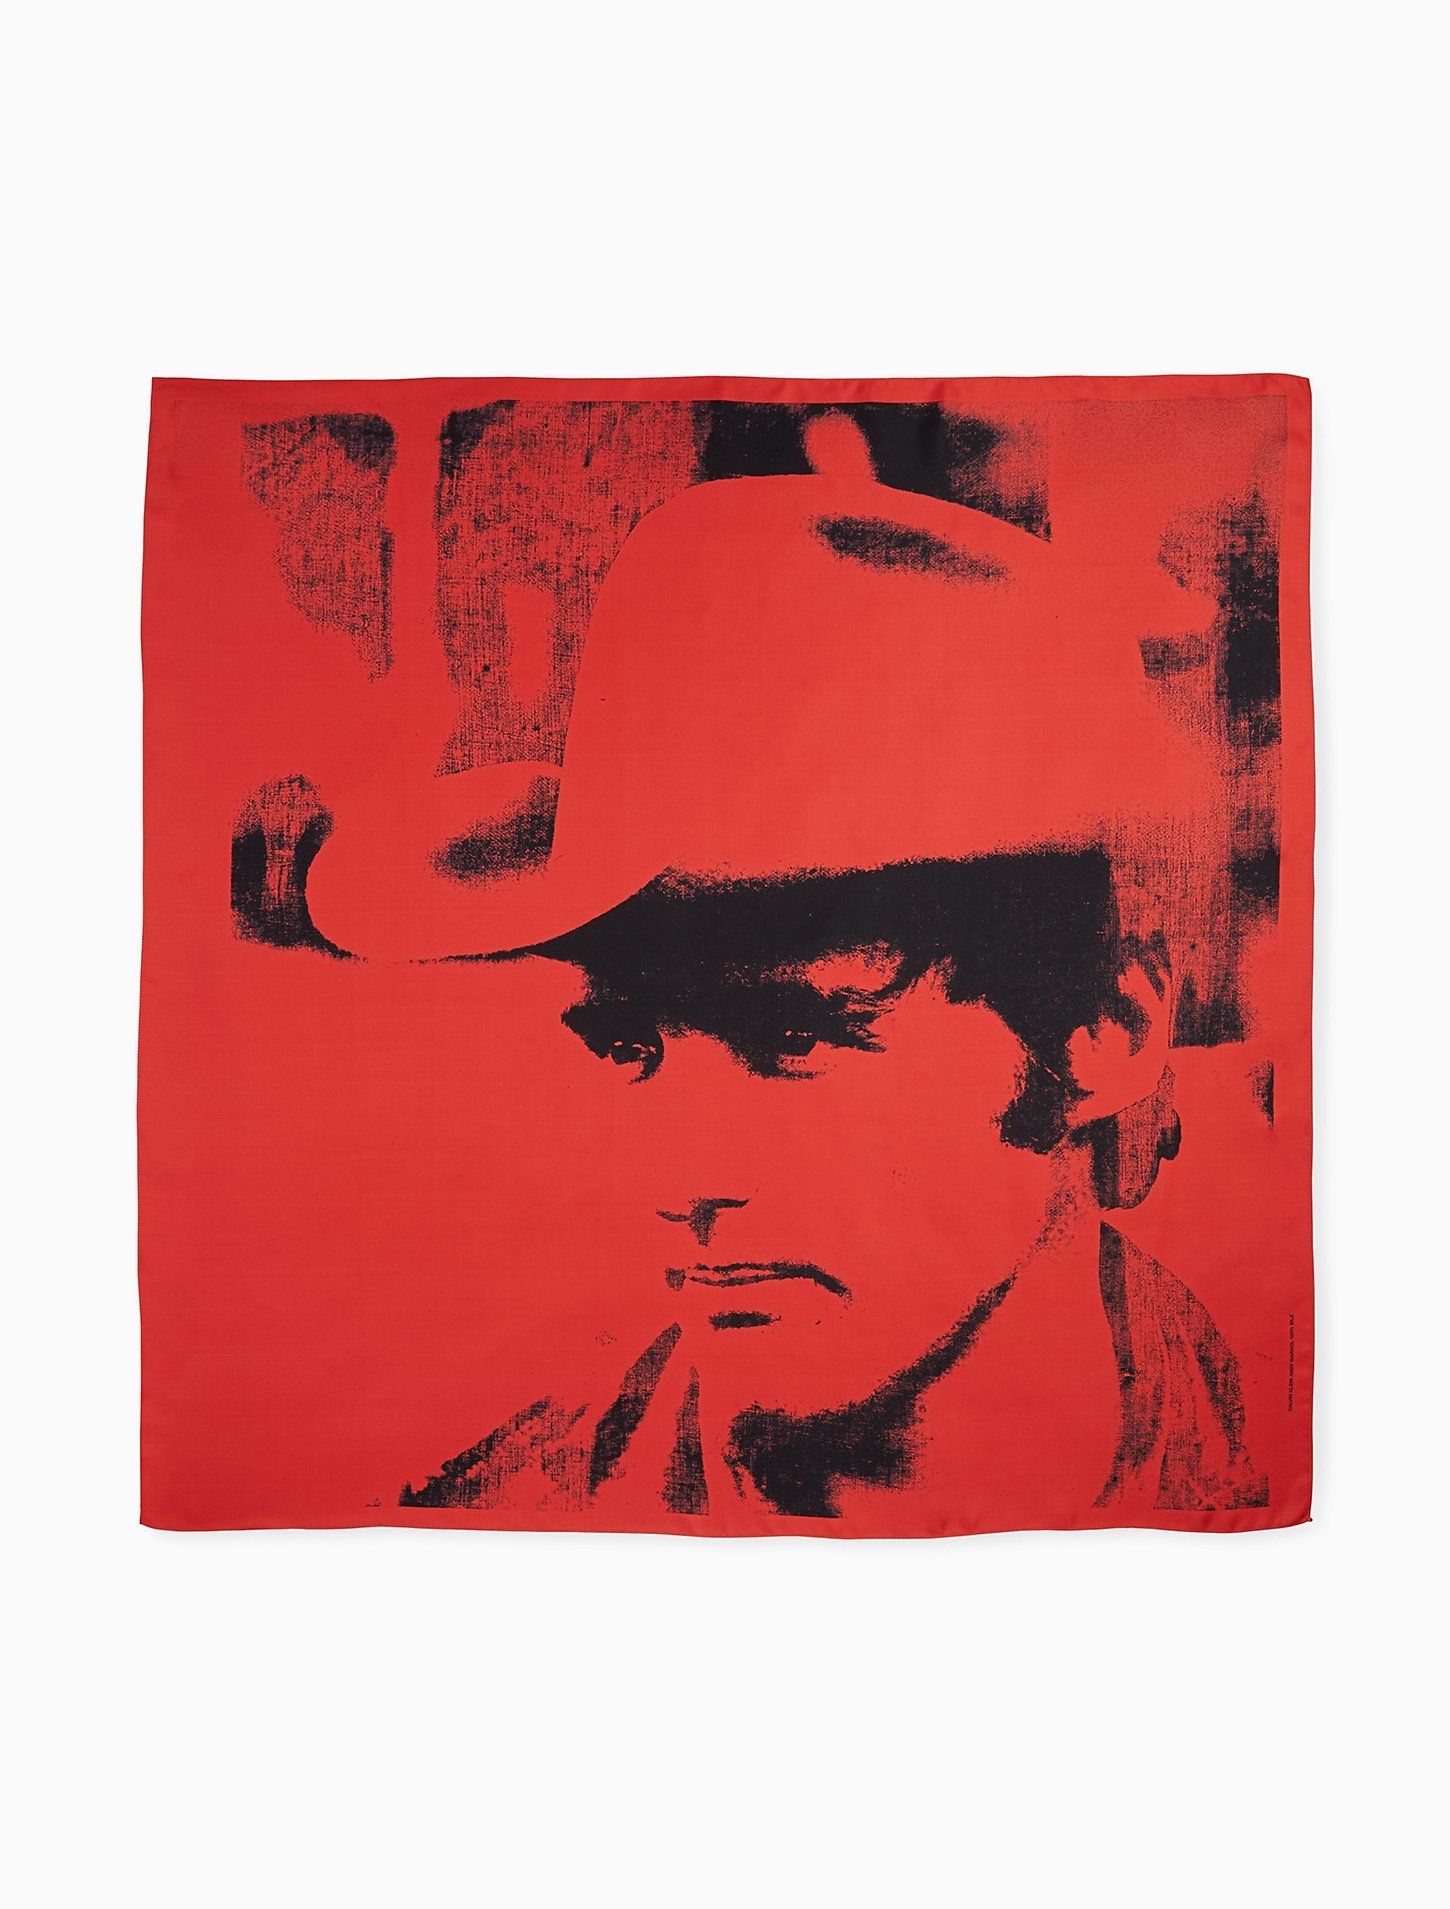 you can now wear andy warhol’s never-before-seen artwork